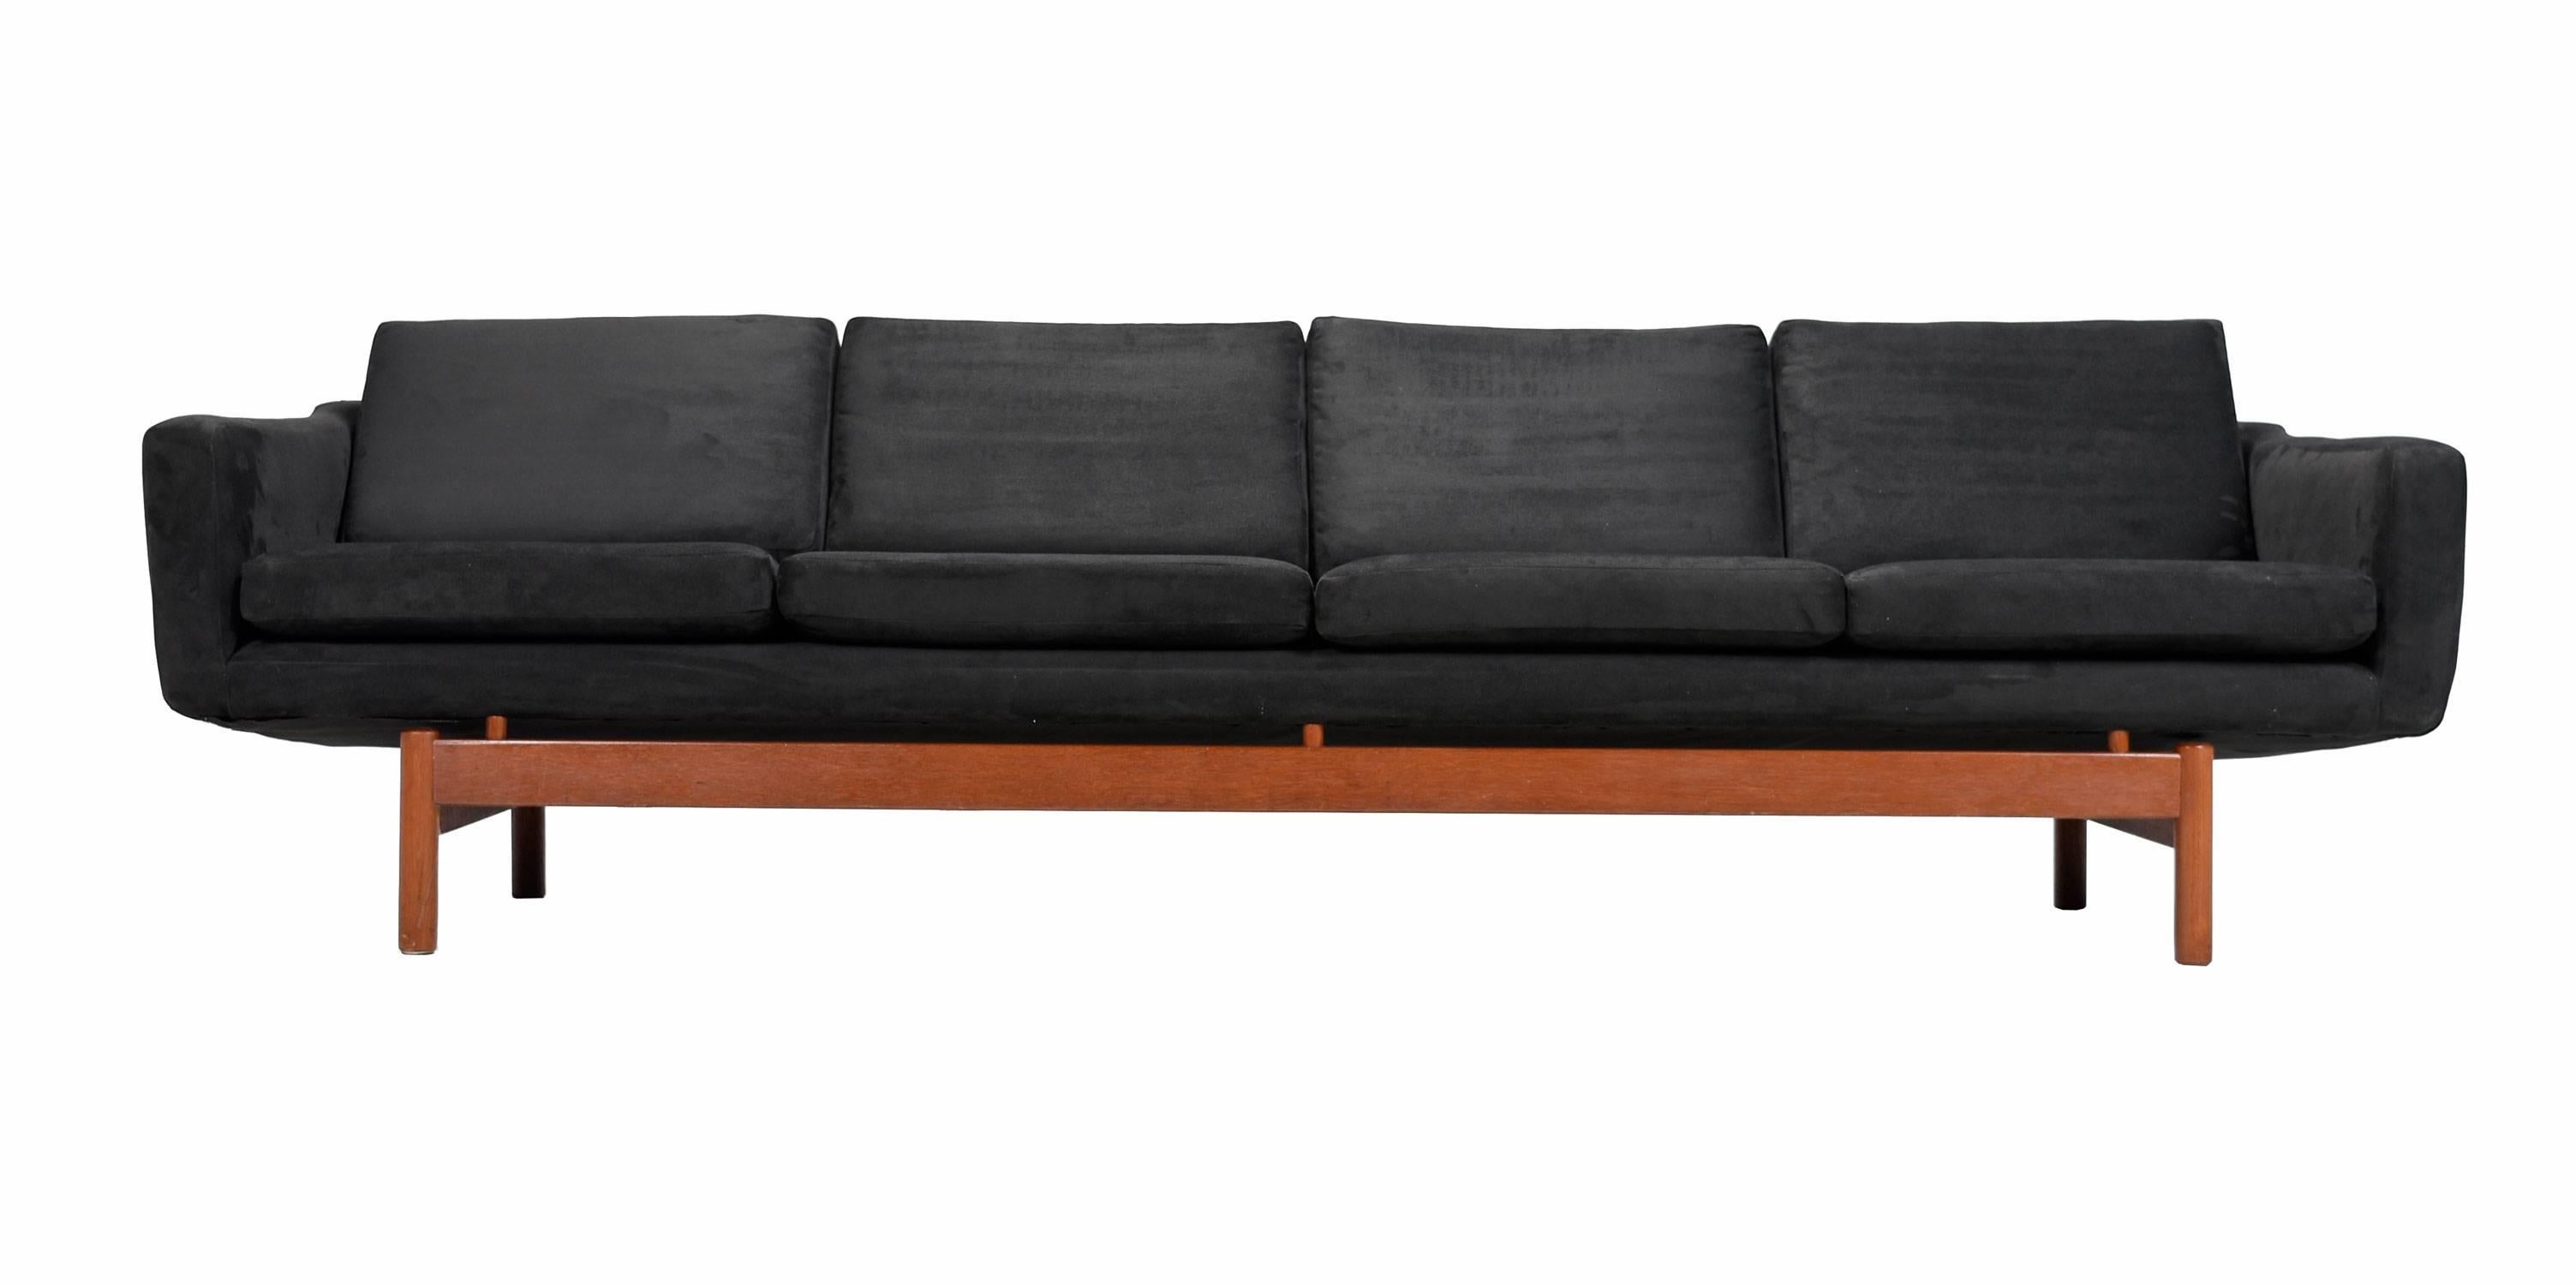 Early Mid-Century Modern Danish teak sofa with newer black upholstery. This sofa was recently recovered by the previous owner and has like-new condition upholstery. Besides the newer fabric covering, the sofa has been professionally steam cleaned to